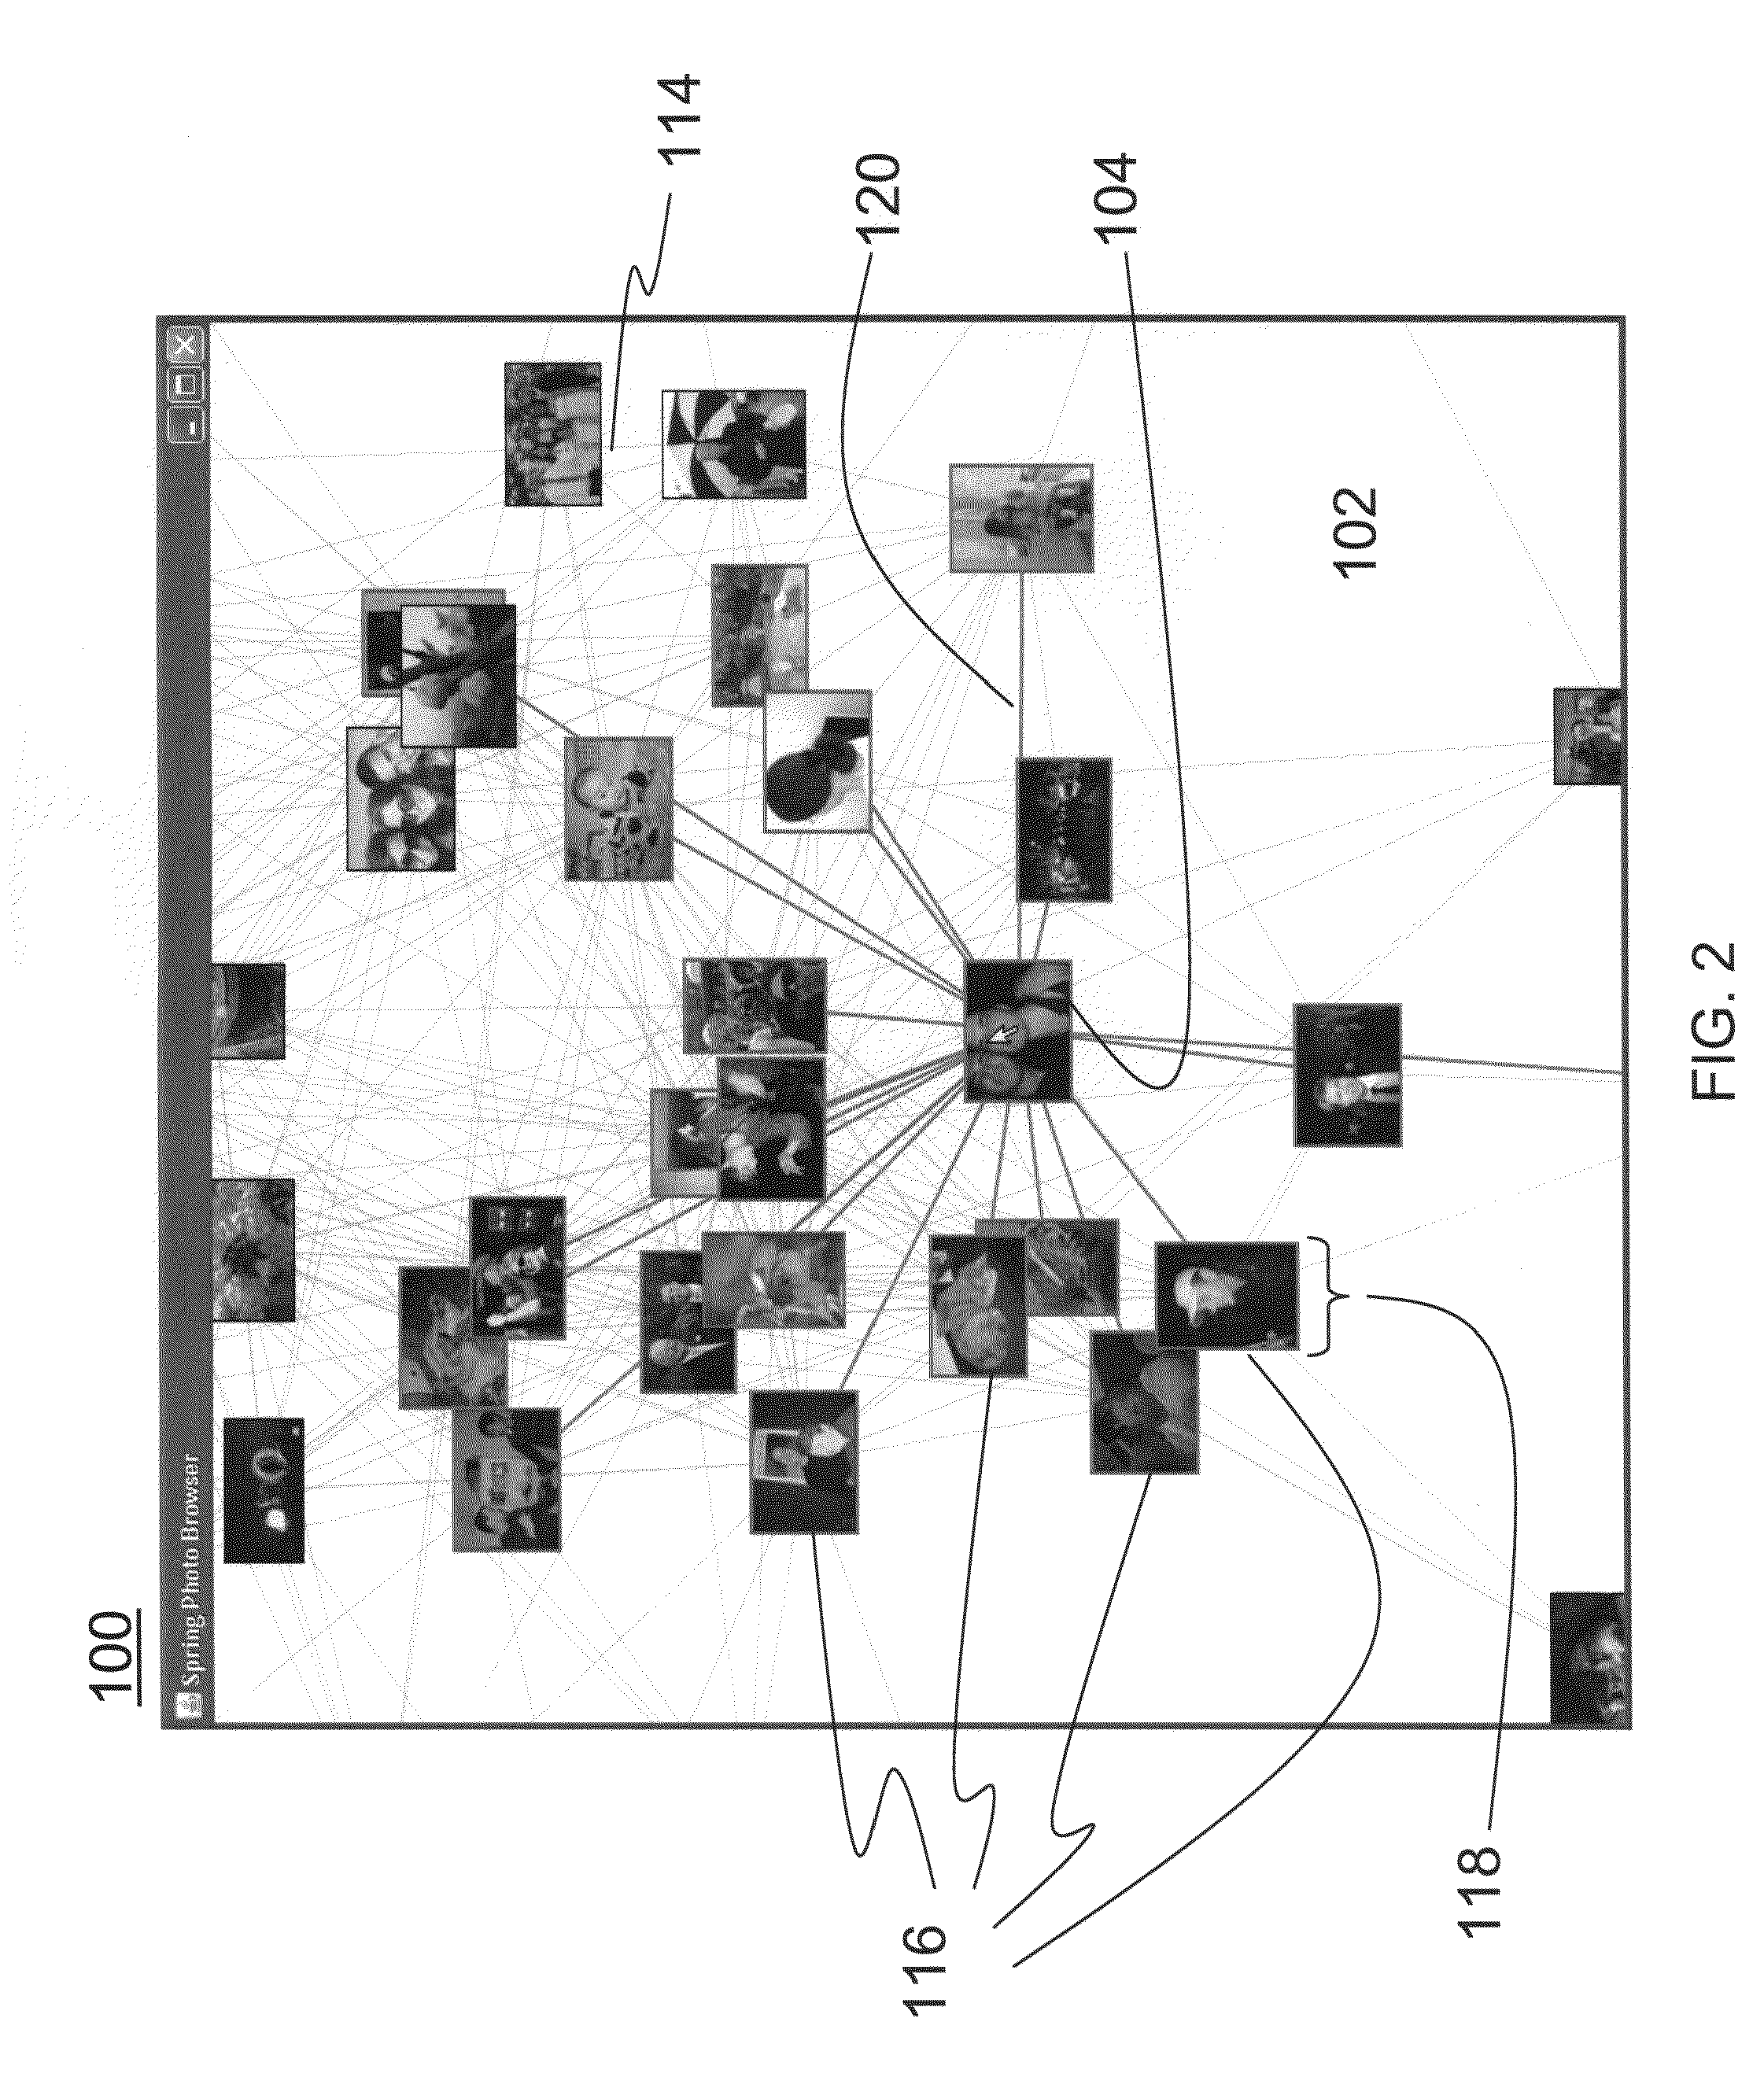 Systems and methods for organizing files in a graph-based layout